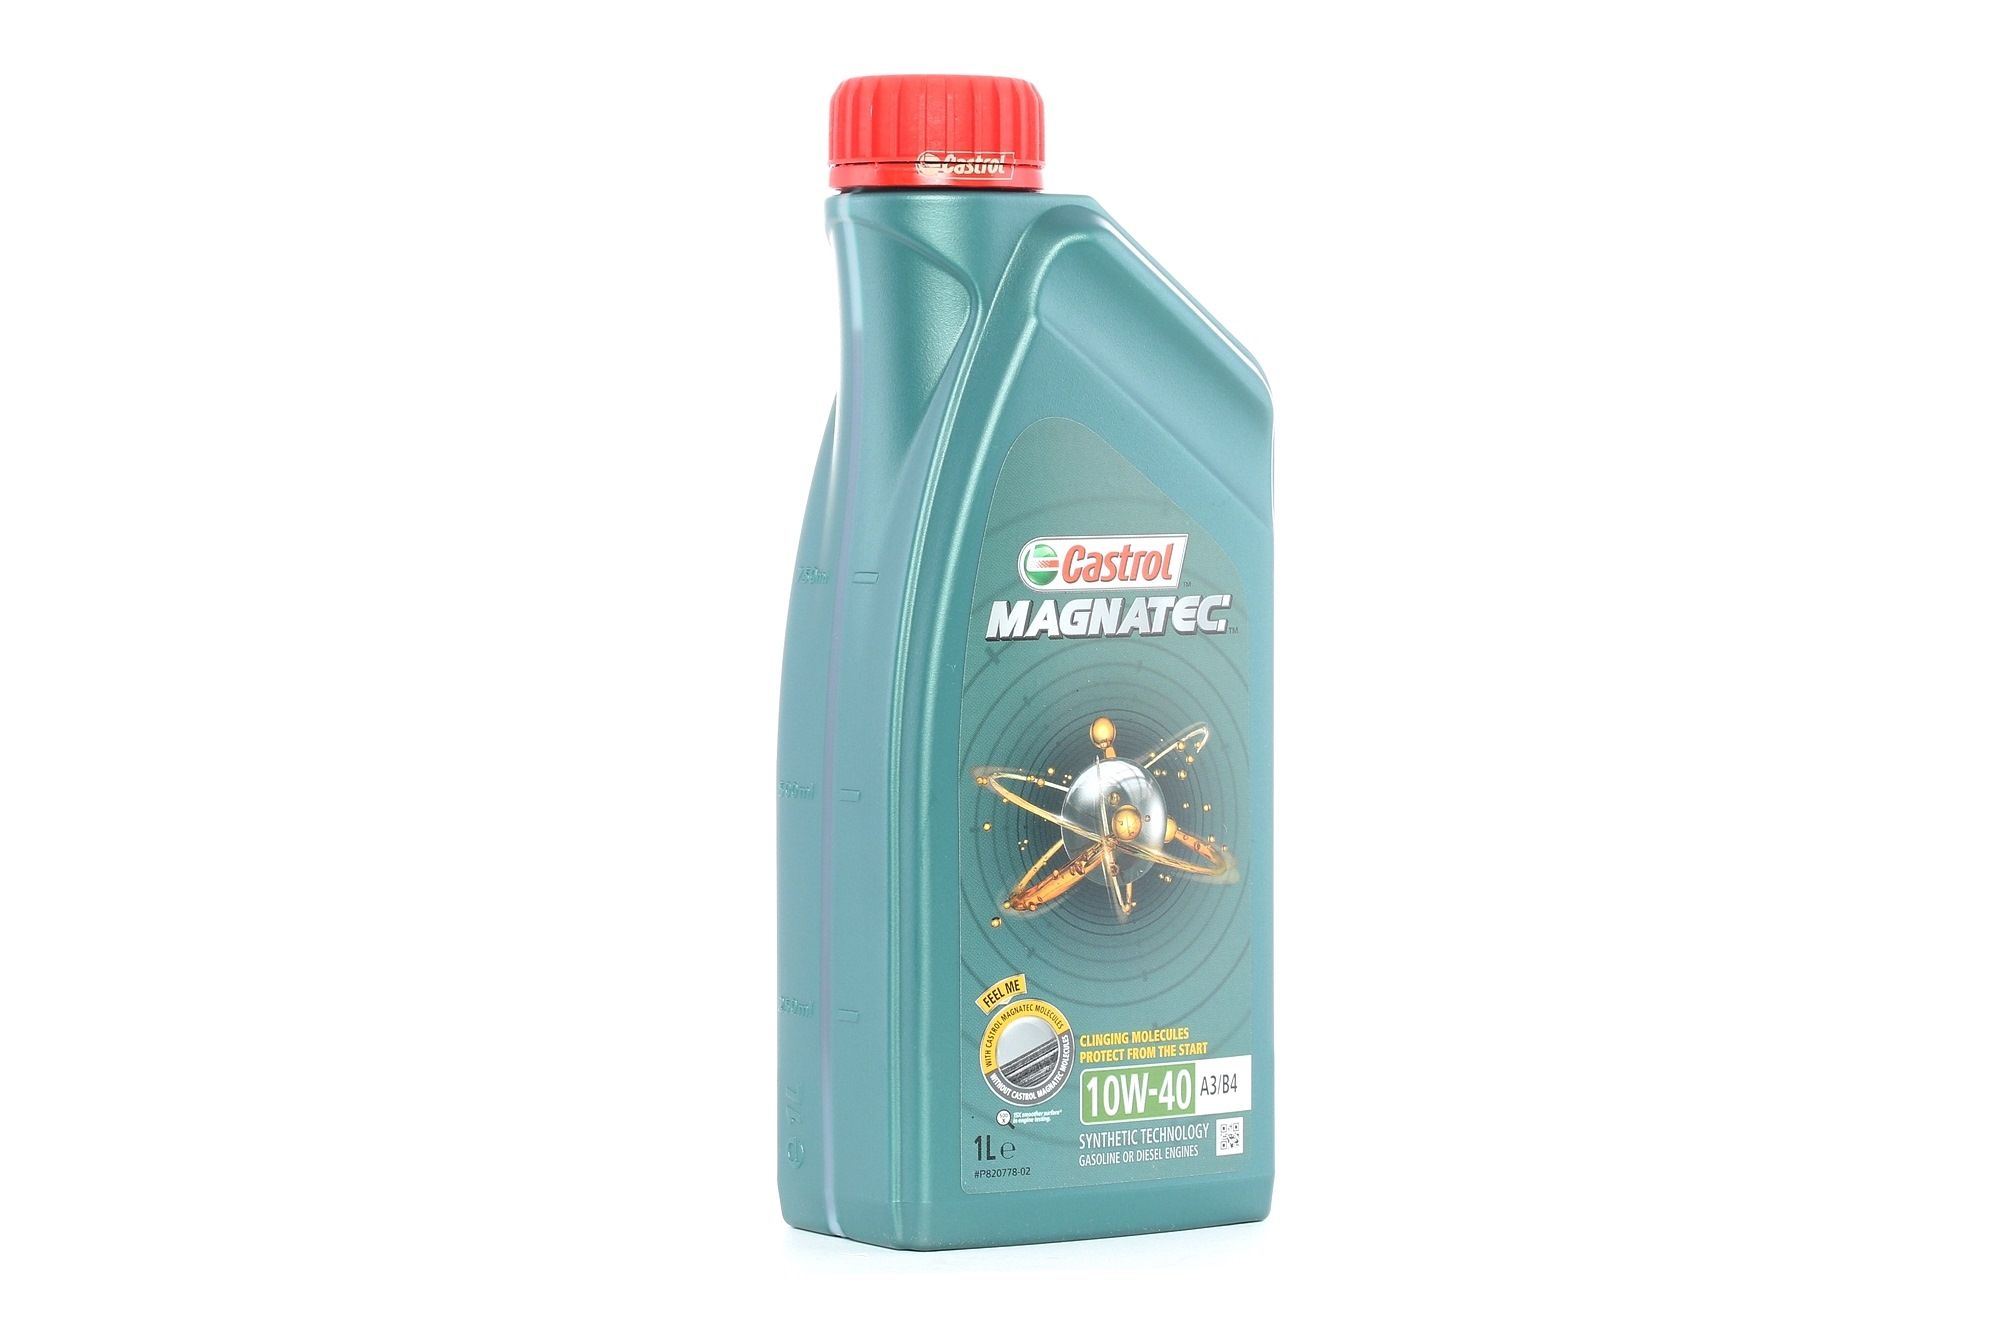 CASTROL 151B52 Engine oil cheap in online store